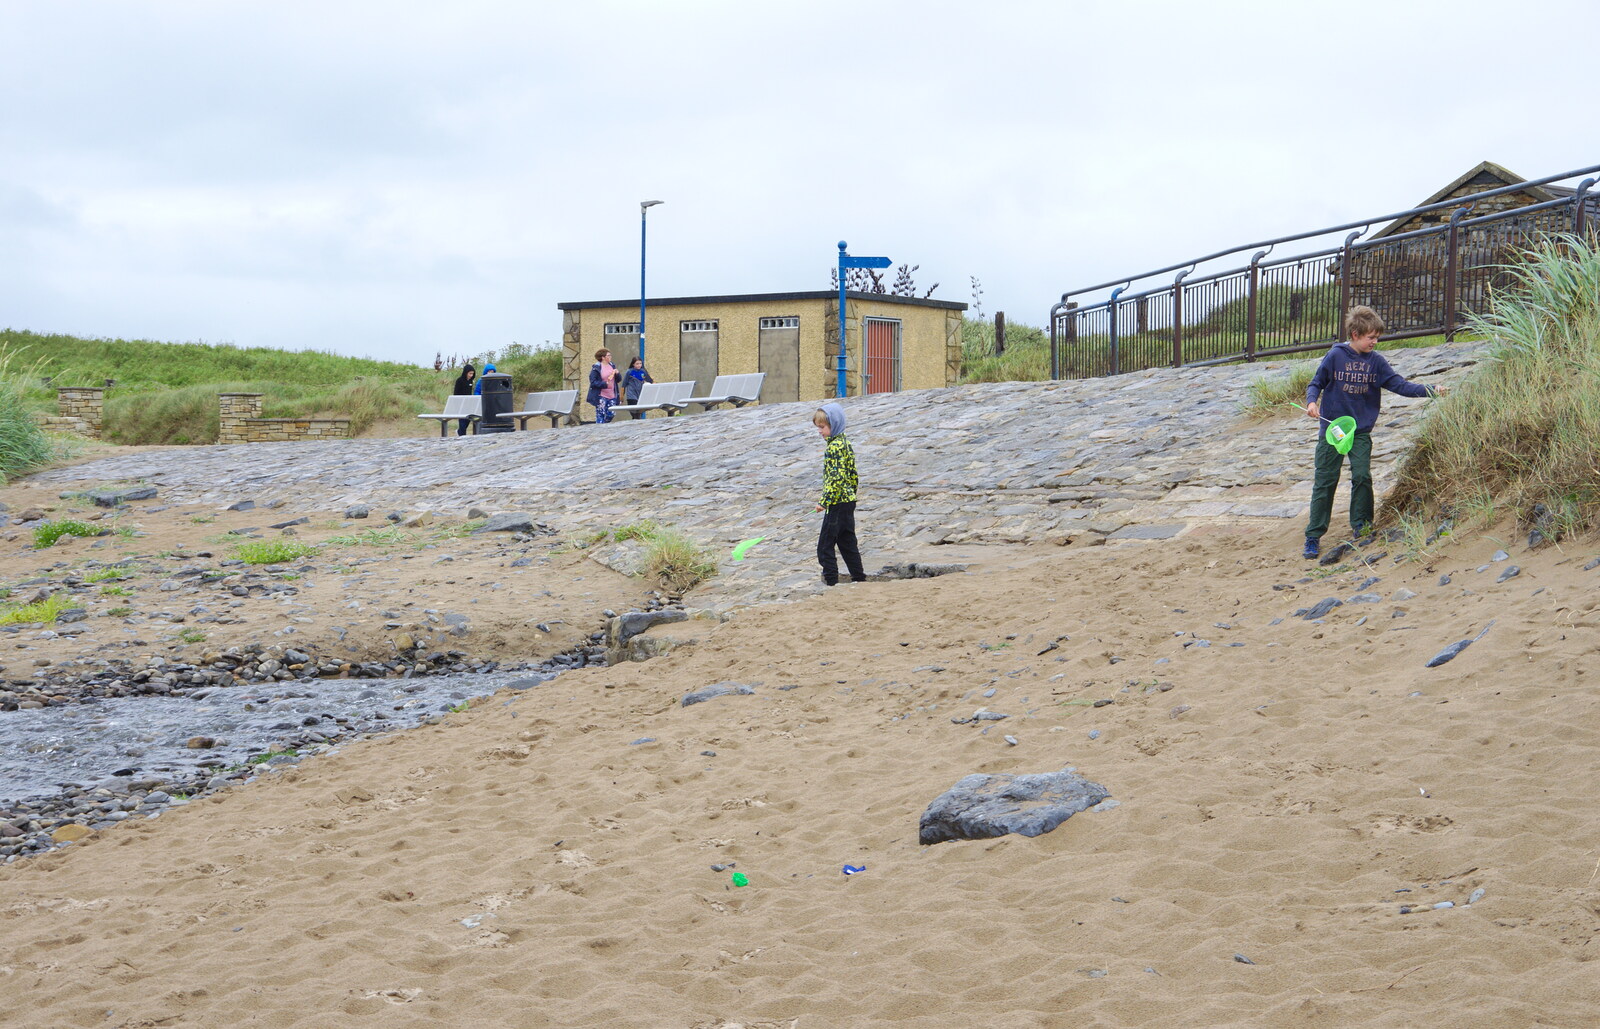 The boys on the beach at Bundoran from A Day in Derry, County Londonderry, Northern Ireland - 15th August 2019